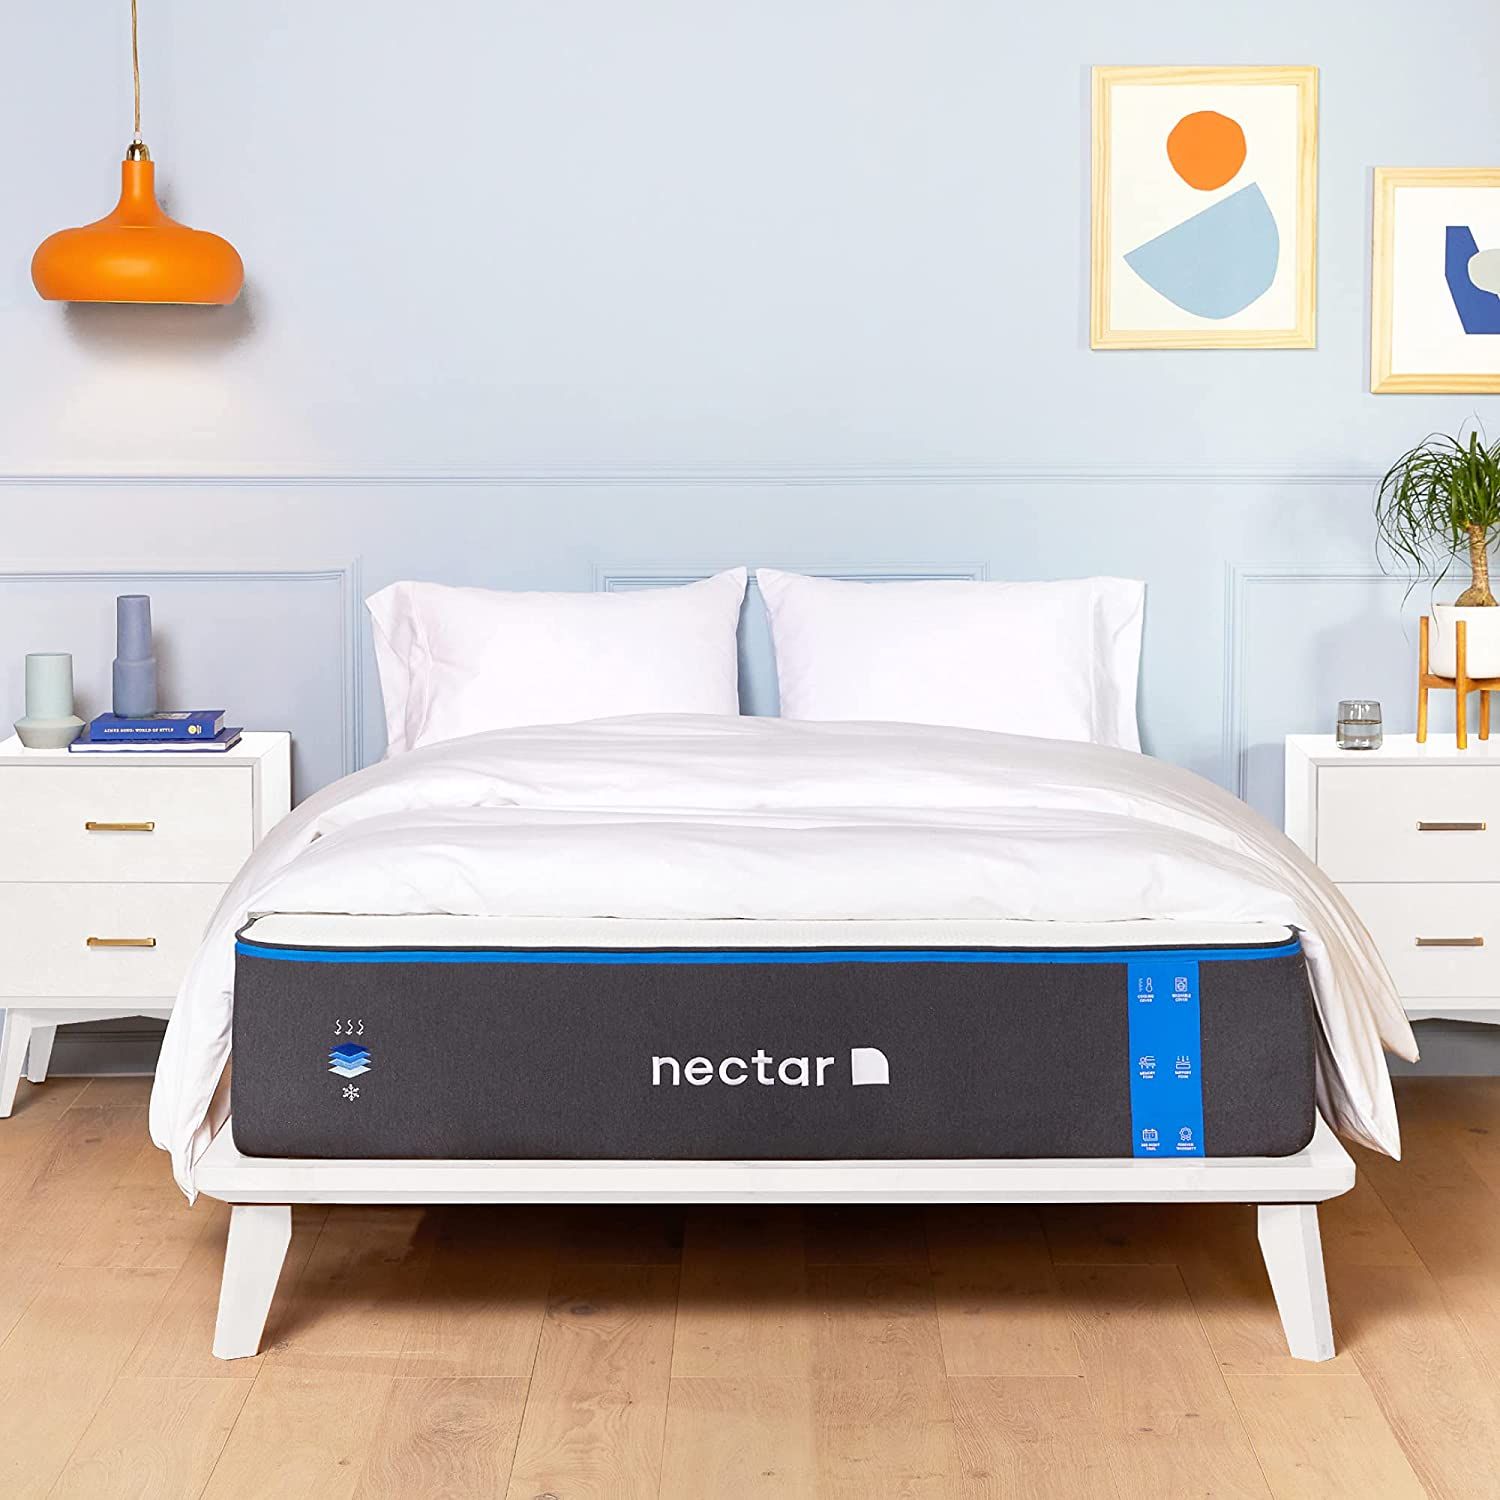 The 10 Best Mattress for Stomach Sleepers of 2021 ReviewThis